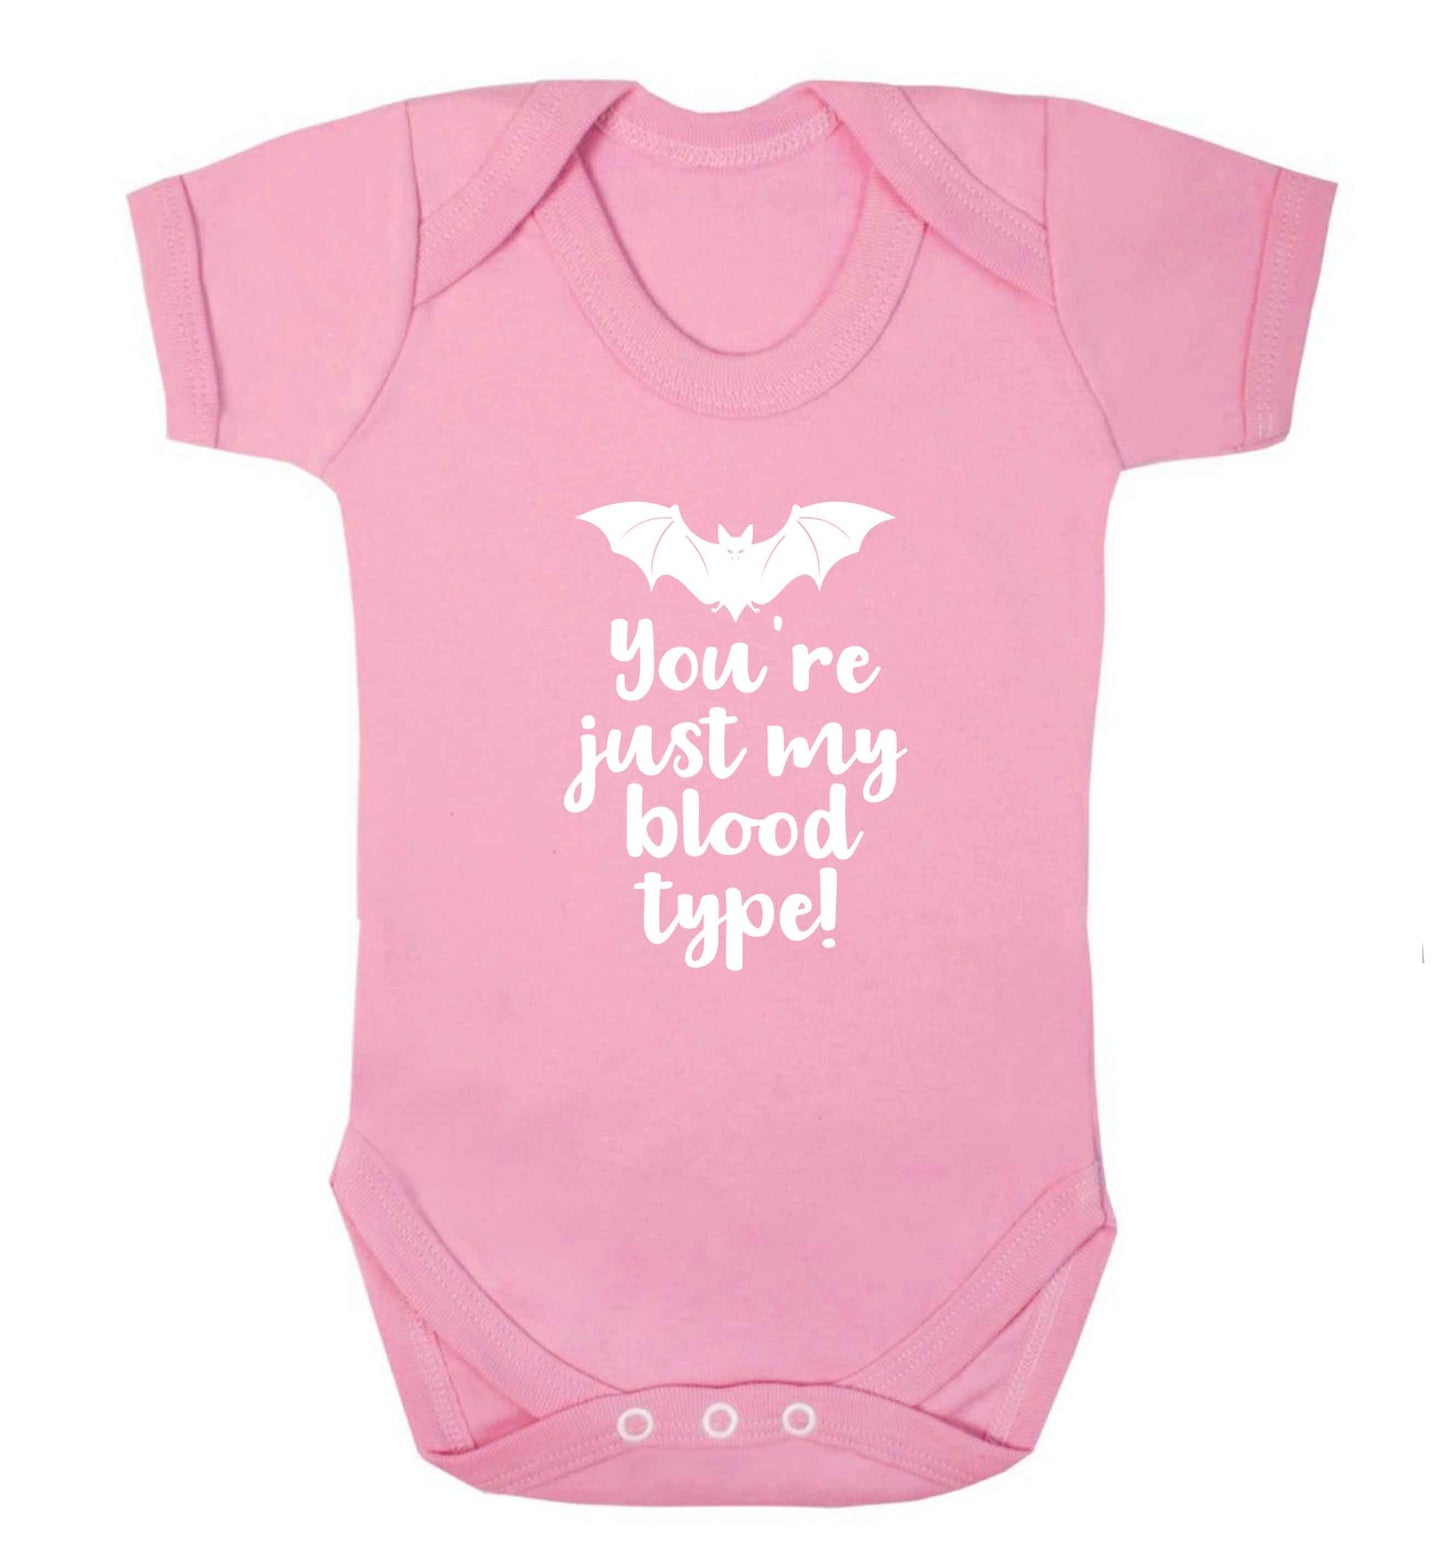 You're just my blood type baby vest pale pink 18-24 months